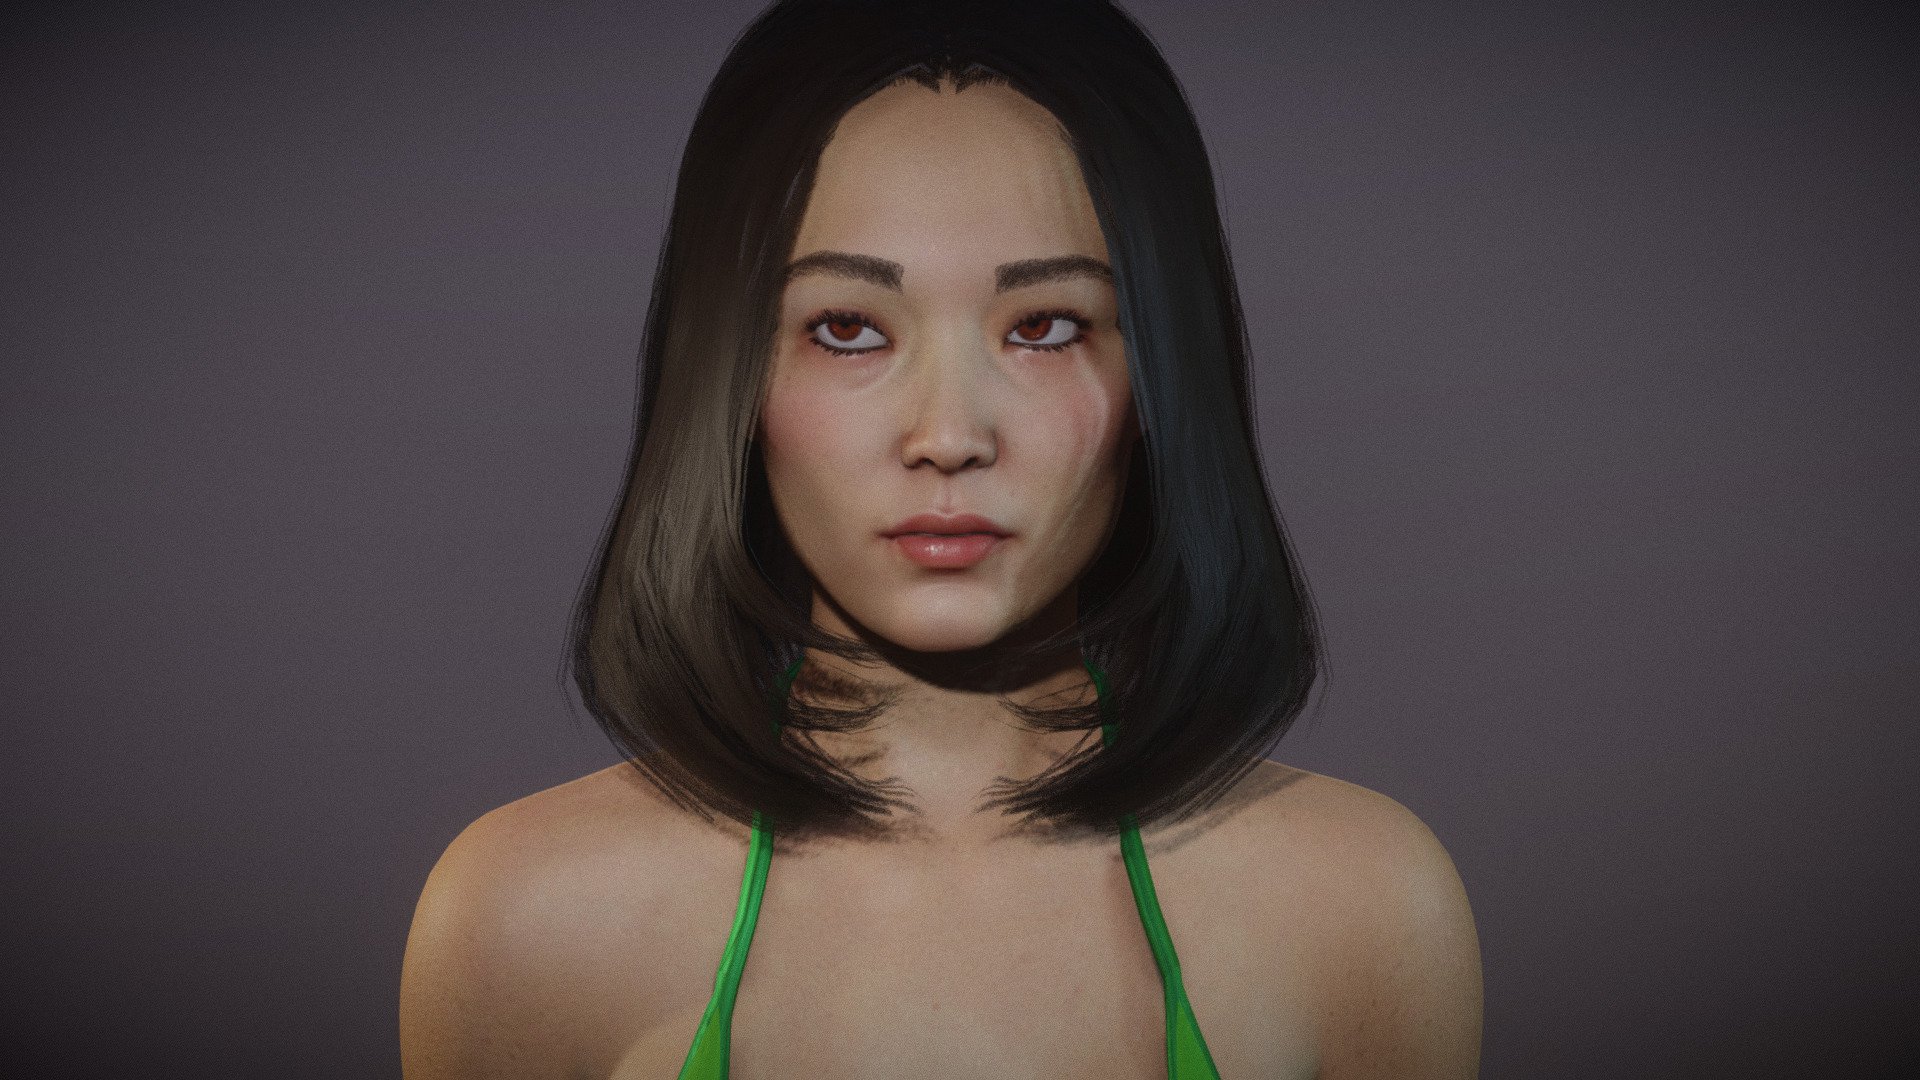 * PLEASE DOWNLOAD THE RAR INSIDE THE ADDITIONAL FILES!!!
Female Asian Girl in bikini , includes 1 more shapekey for body and face https://skfb.ly/oEFZN. Model in Blender file. Fully rigged. SSS subsurface scattering. mixamo bone names for animation. No FBX or OBJ format, only Blend file 3d model